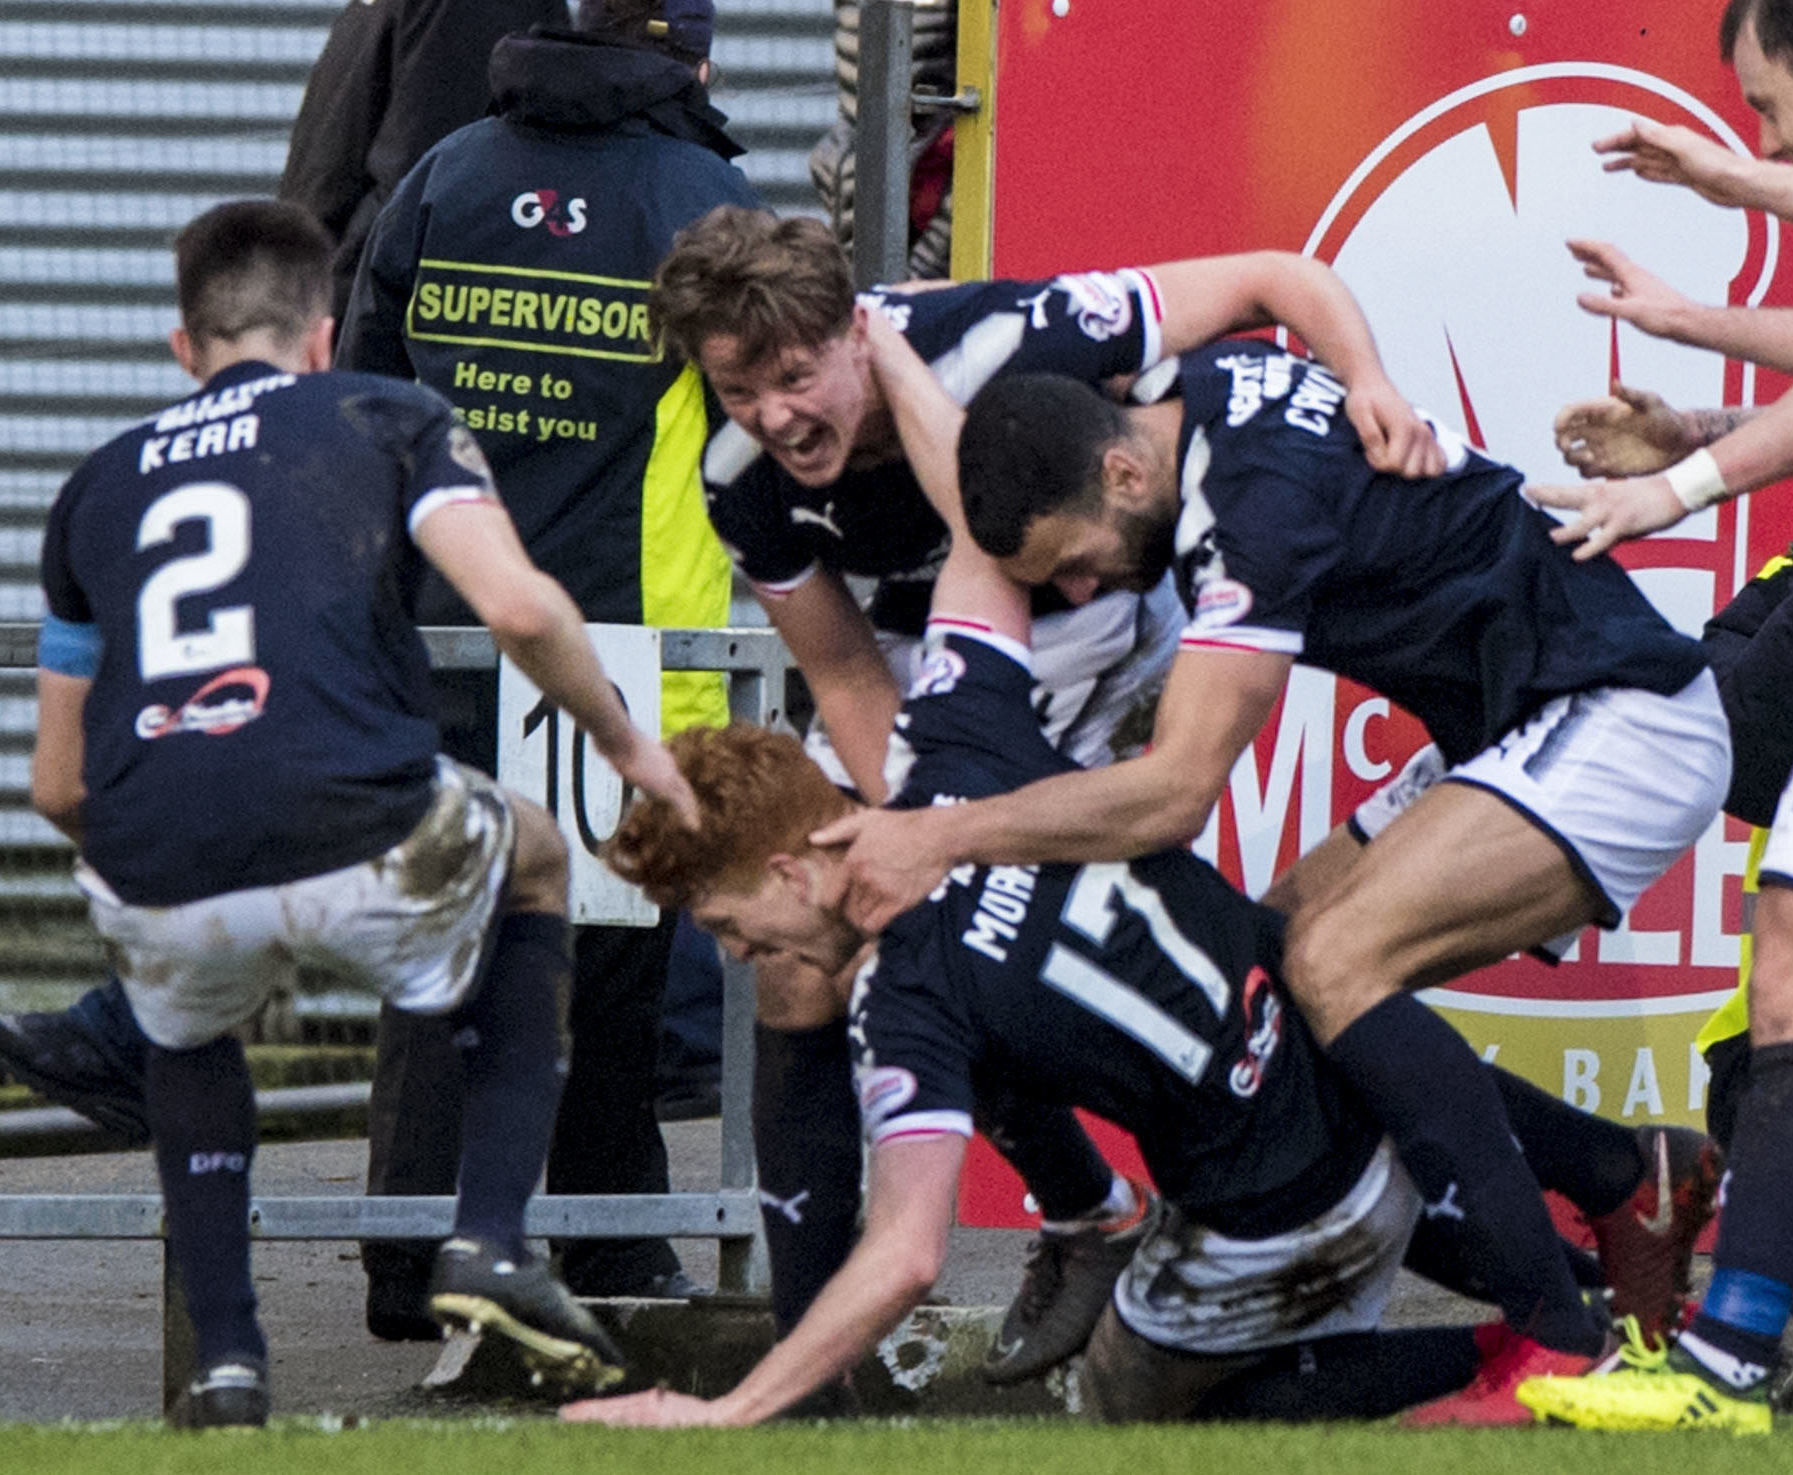 Dundee hope to have something to celebrate again in post-split fixtures.